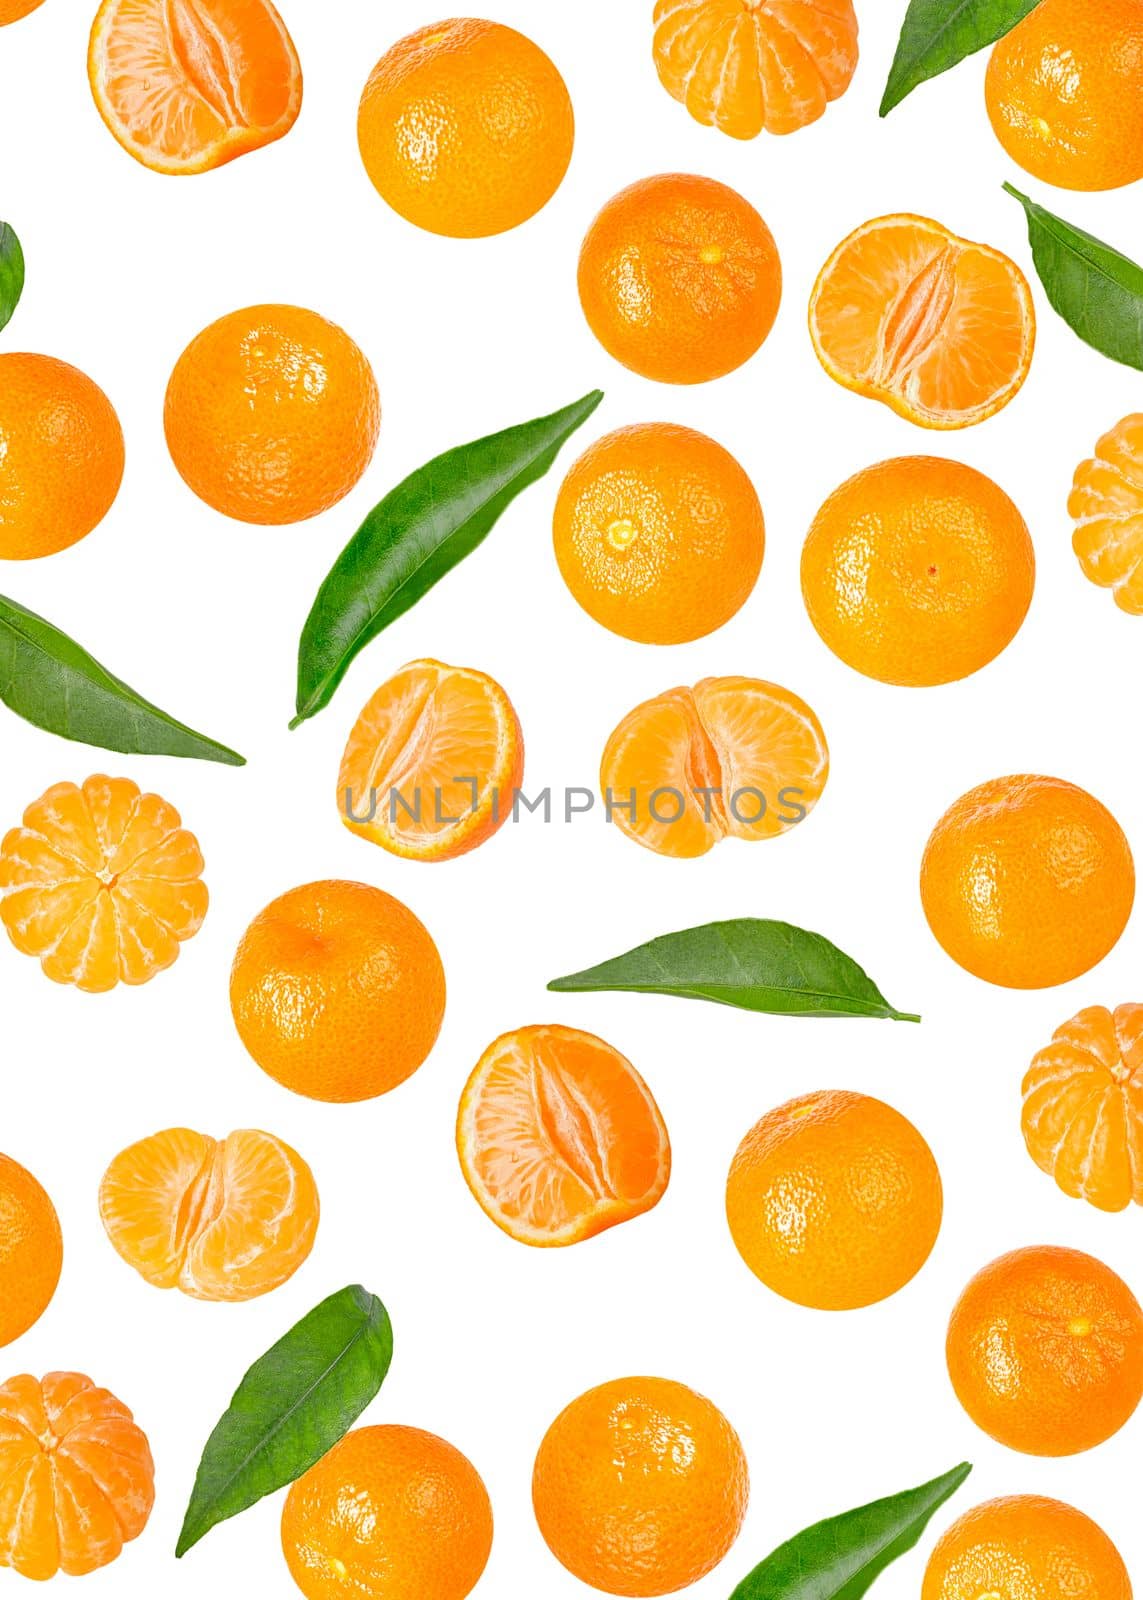 Creative levitation pattern with whole and pieces peeled tangerines. Selective focus. Isolated fruit. Packaging concept. Clip art image for package design.